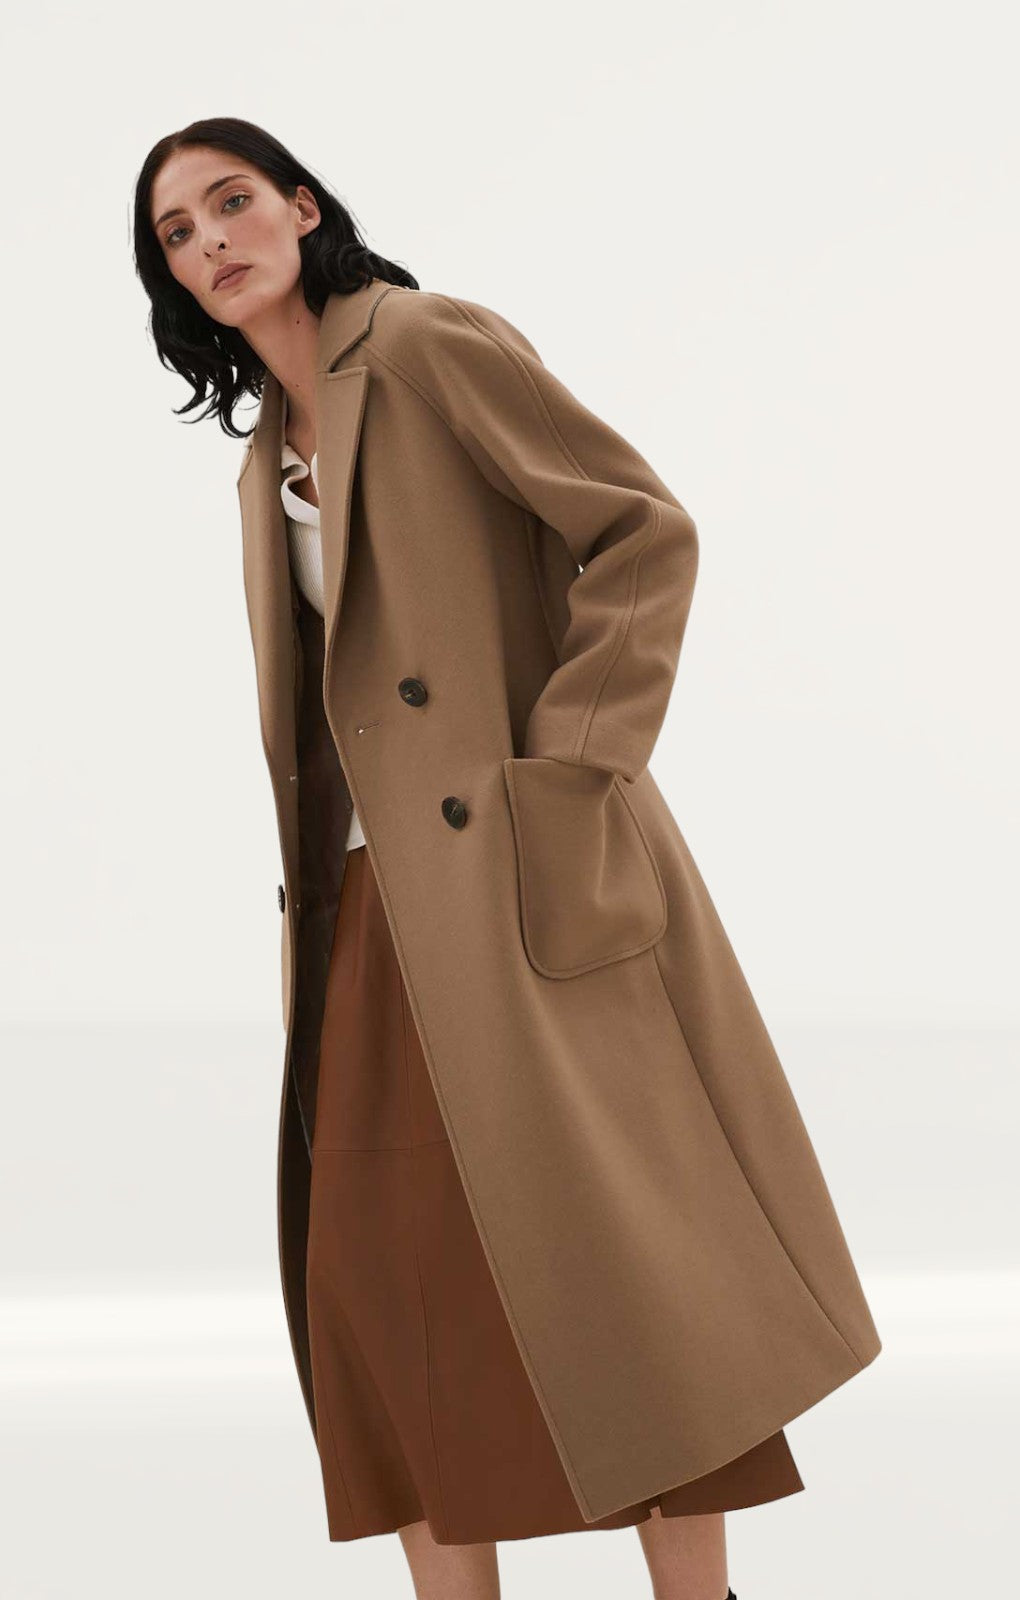 M&S Wool Double Breasted Coat product image